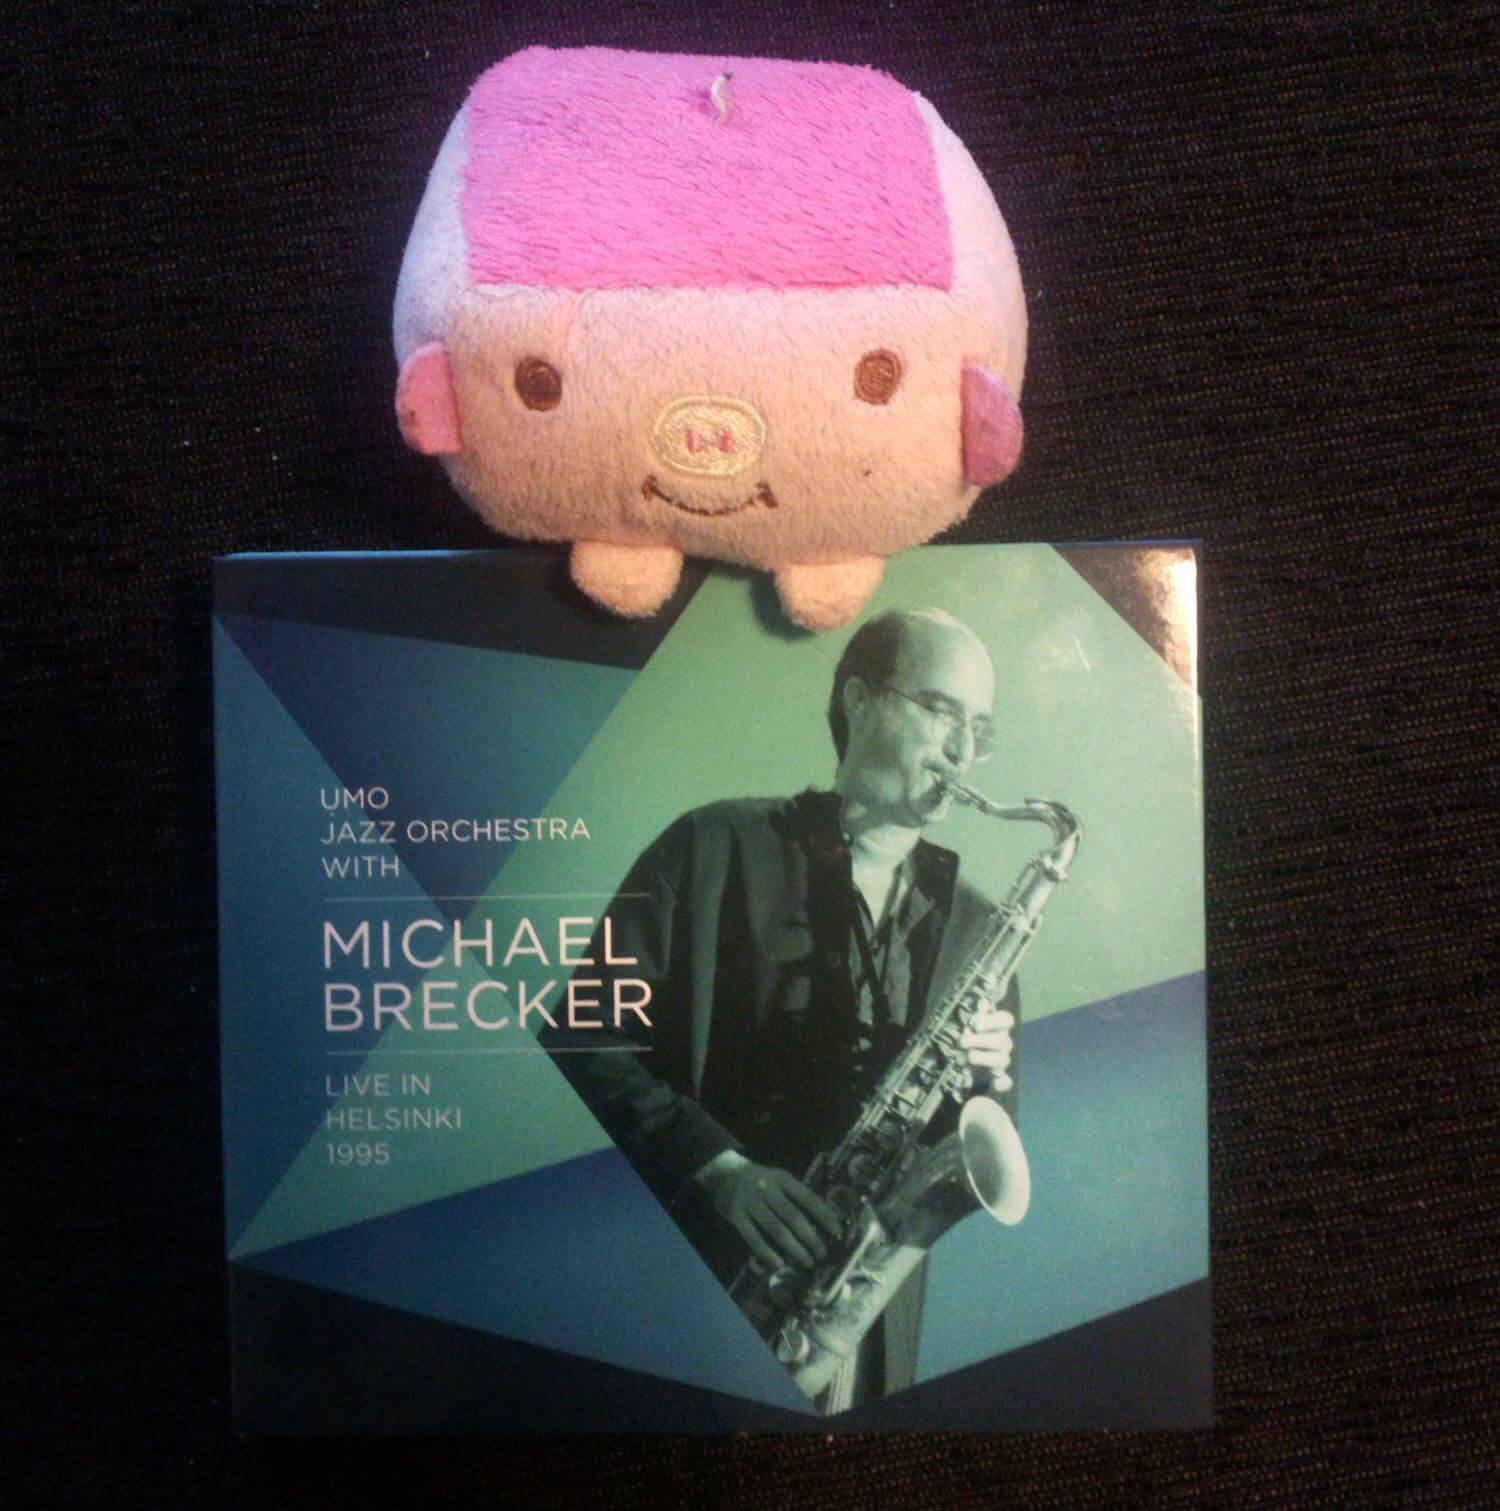 UMO with Michael Brecker: Live in Helsinki 1995